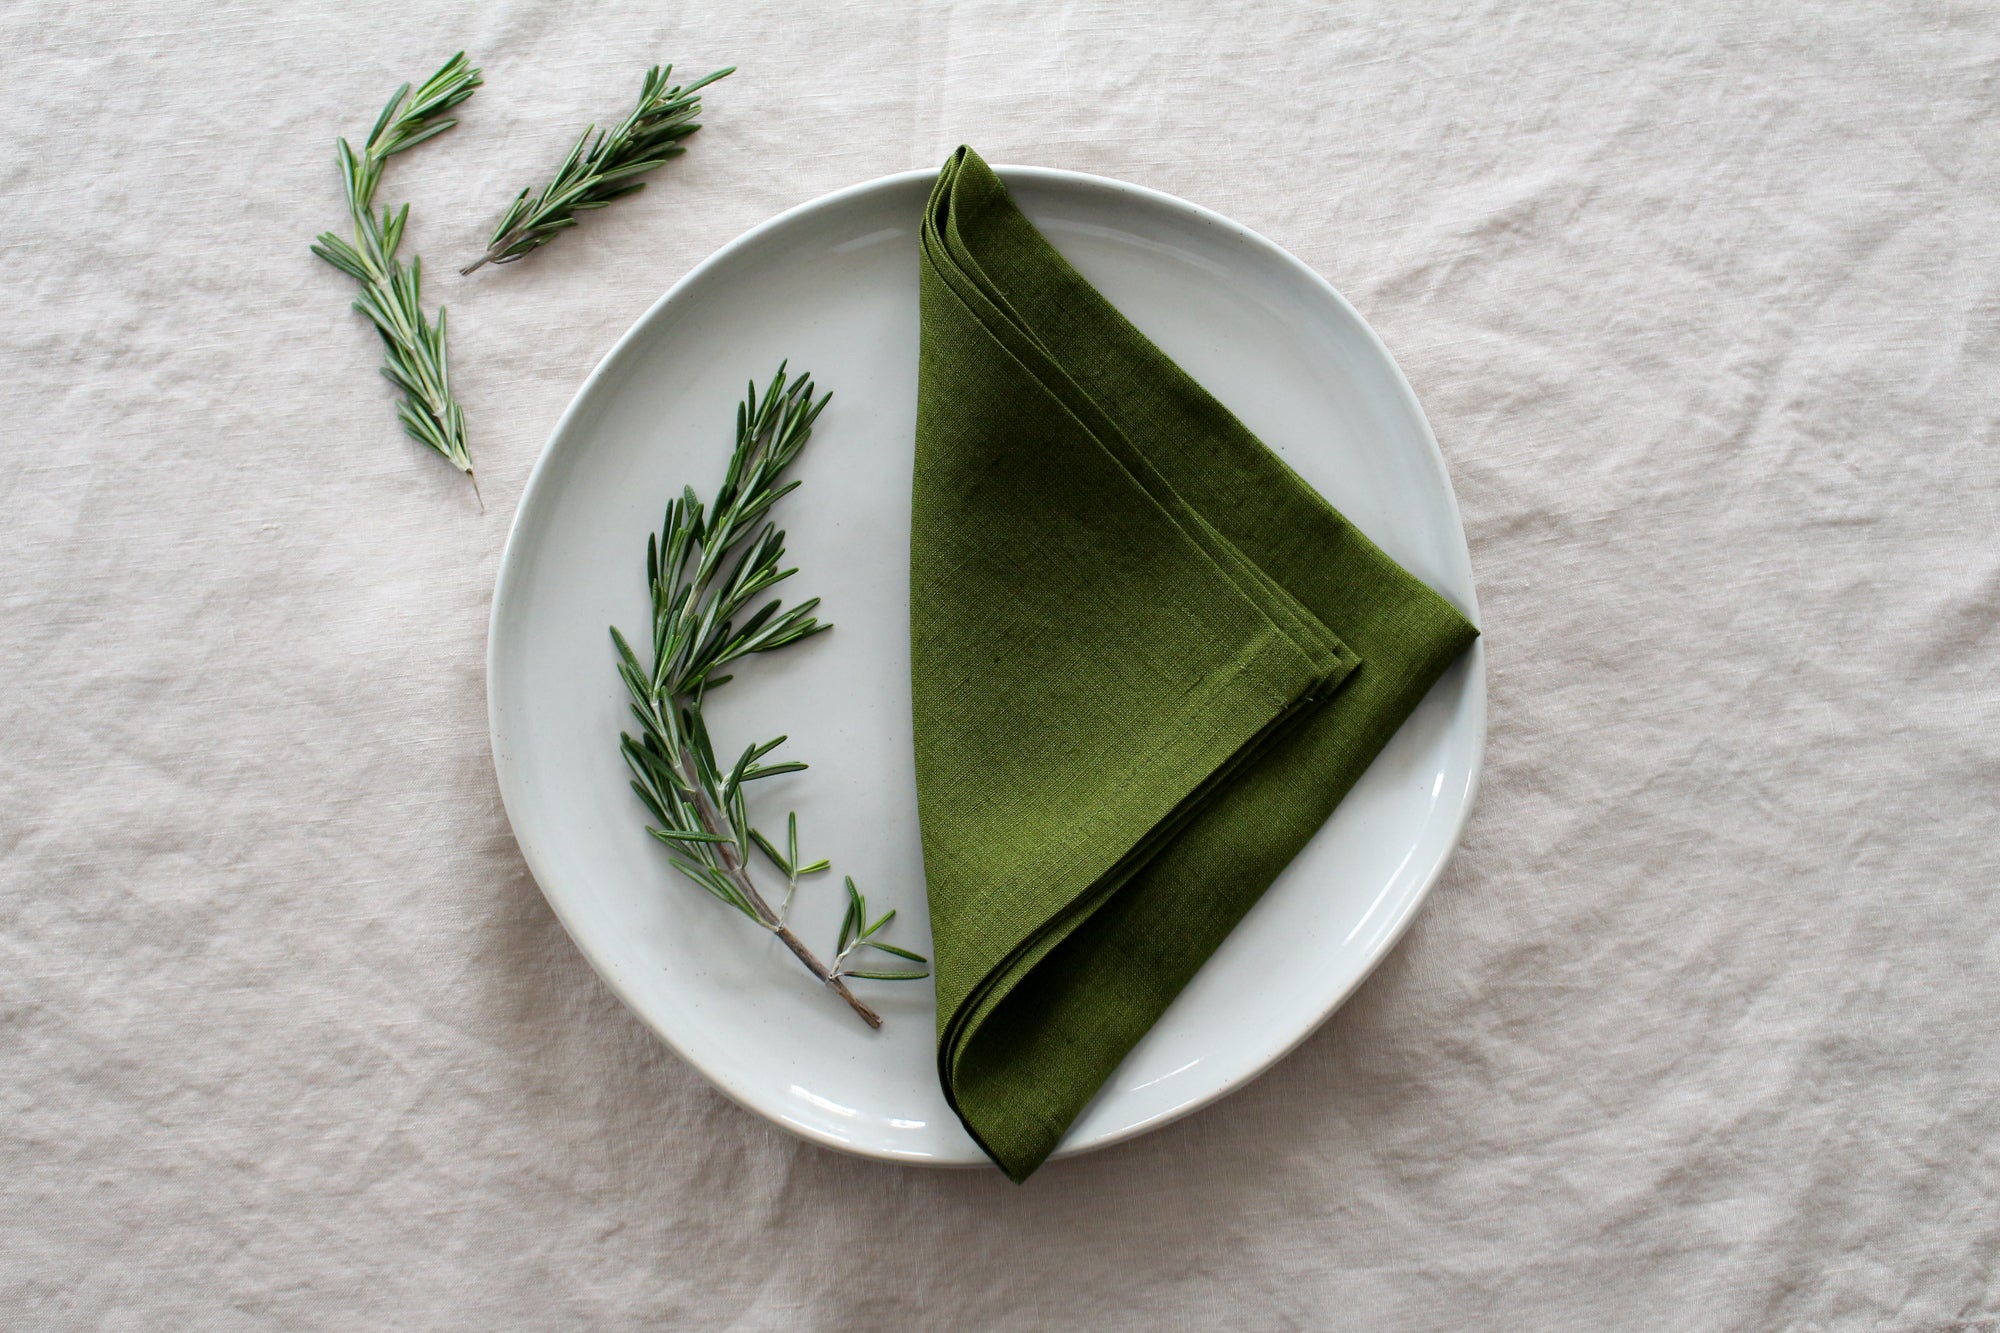 Dark Green Linen Napkins Set of 2 4 6 8 10 12. Green Cloth Napkins 16 Inch  Size. Eco-friendly Forest Green Dinner Napkins. Sustainable Gift. 